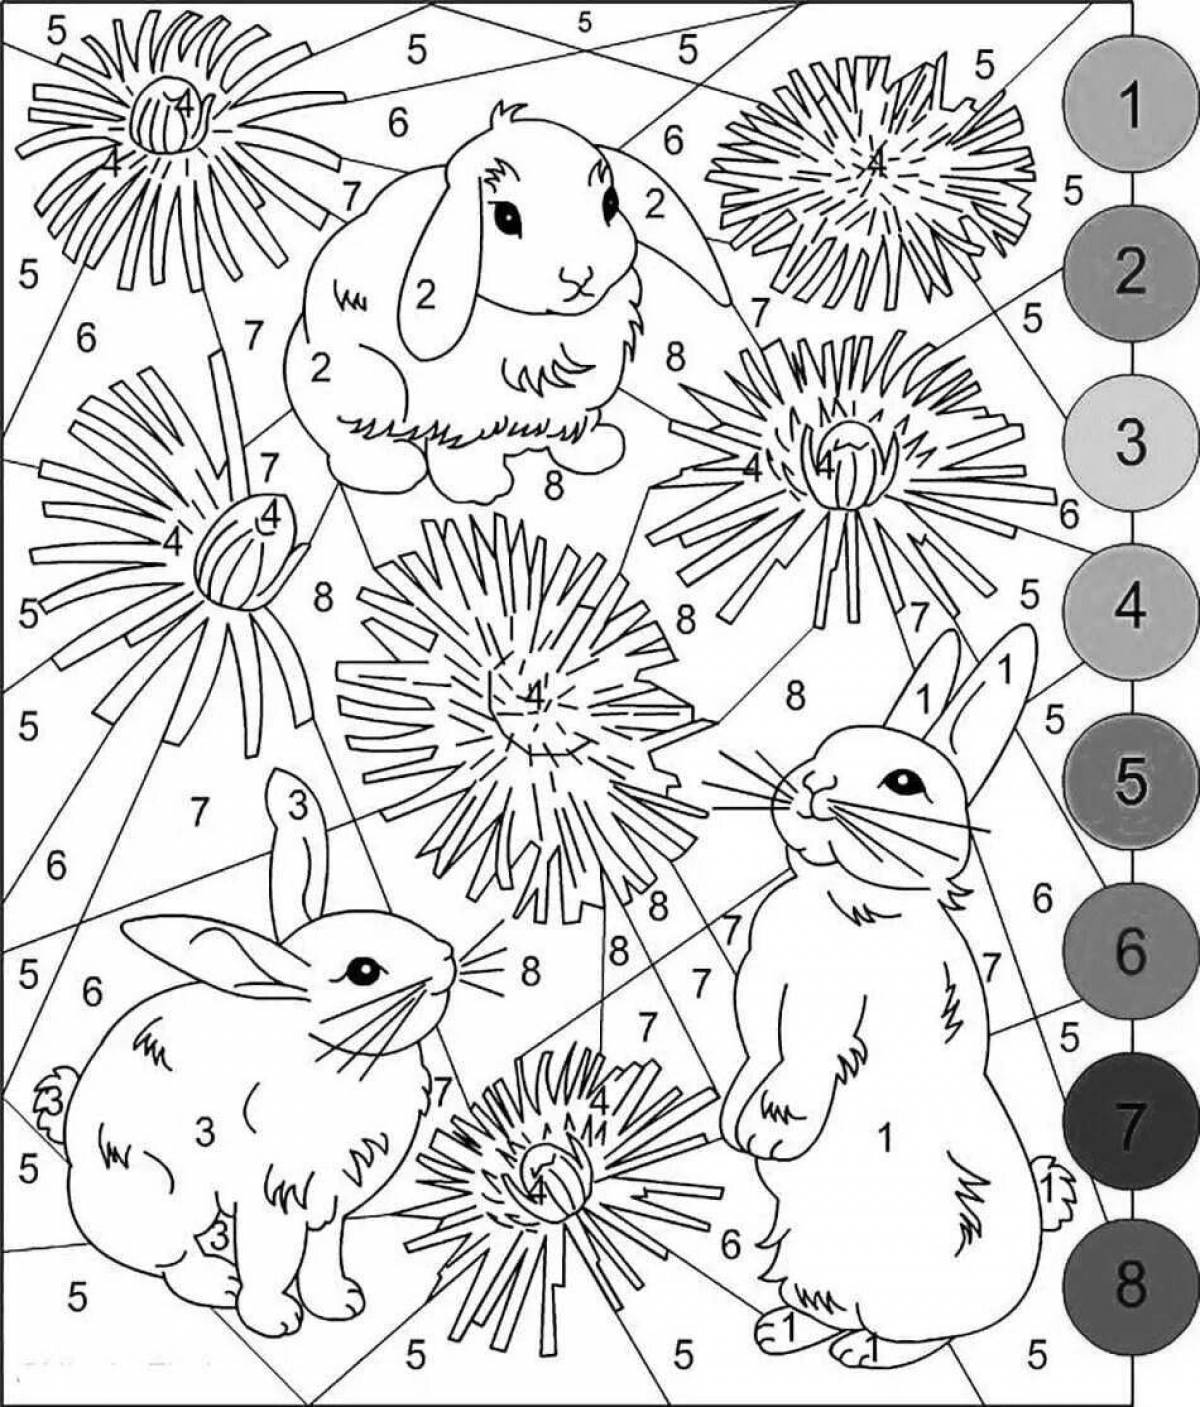 Colored coloring book for children with colored numbers